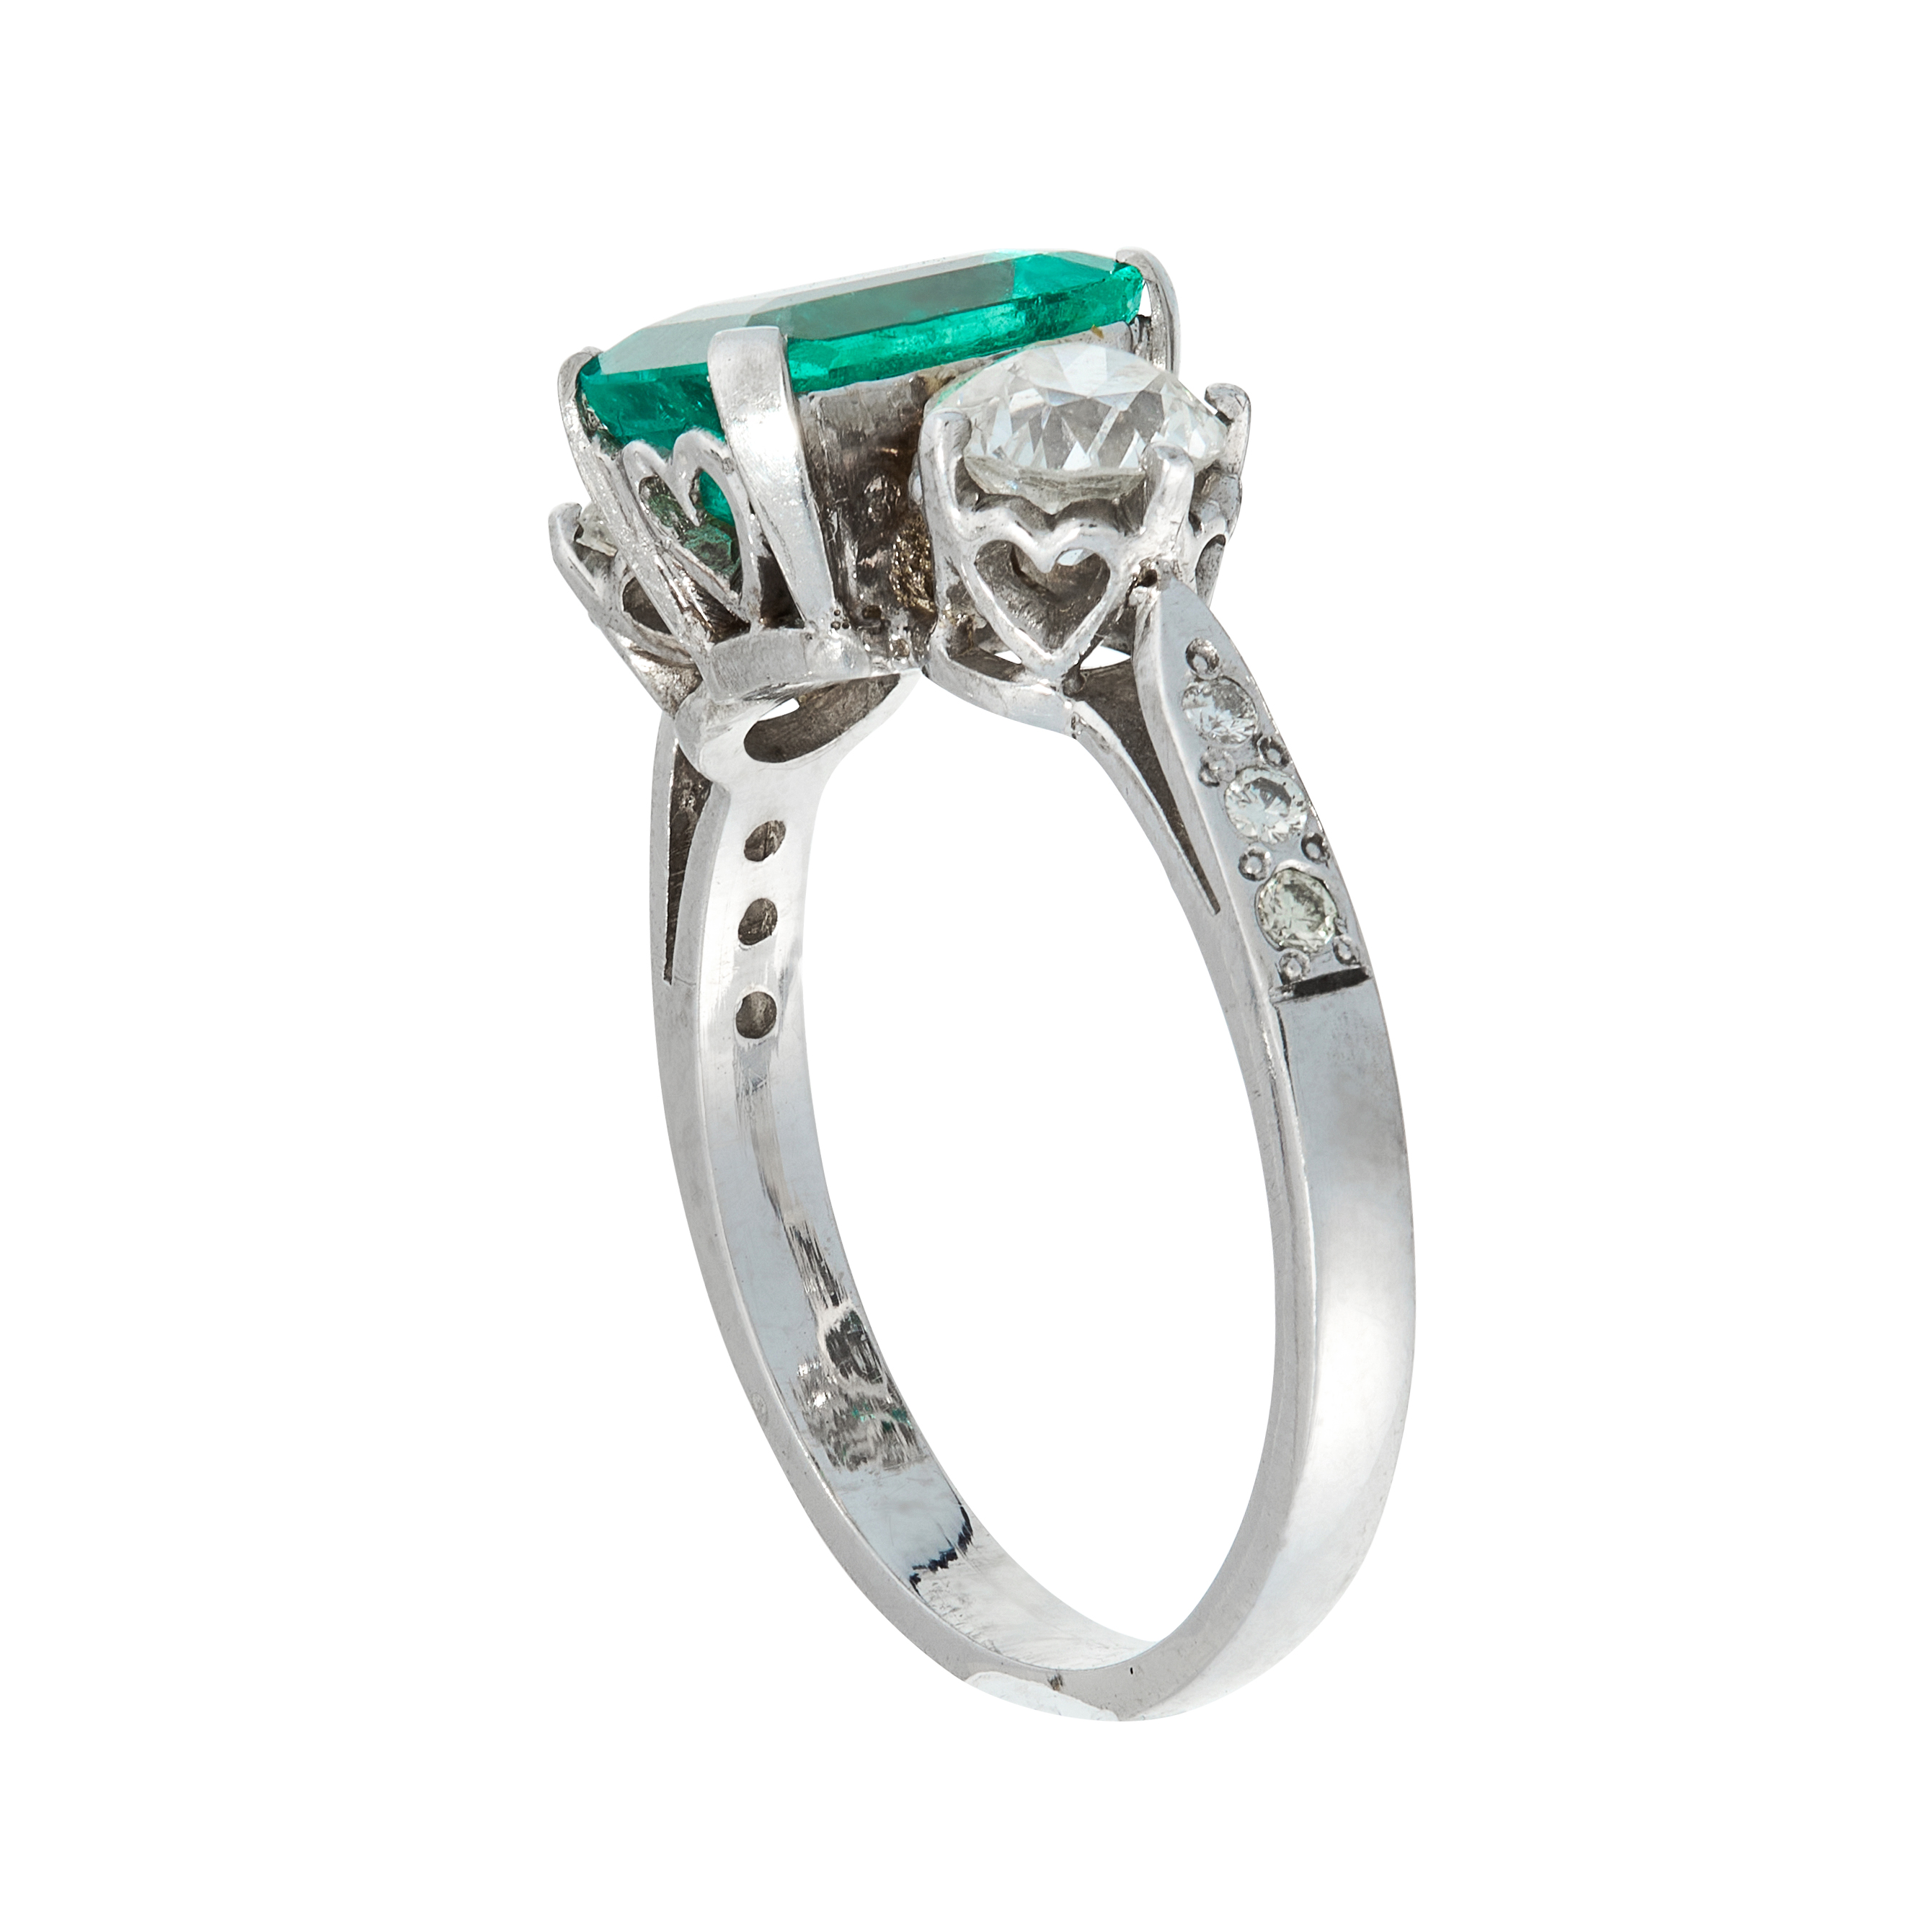 A COLOMBIAN EMERALD AND DIAMOND DRESS RING set with an emerald cut emerald of 2.01 carats, between - Image 2 of 2